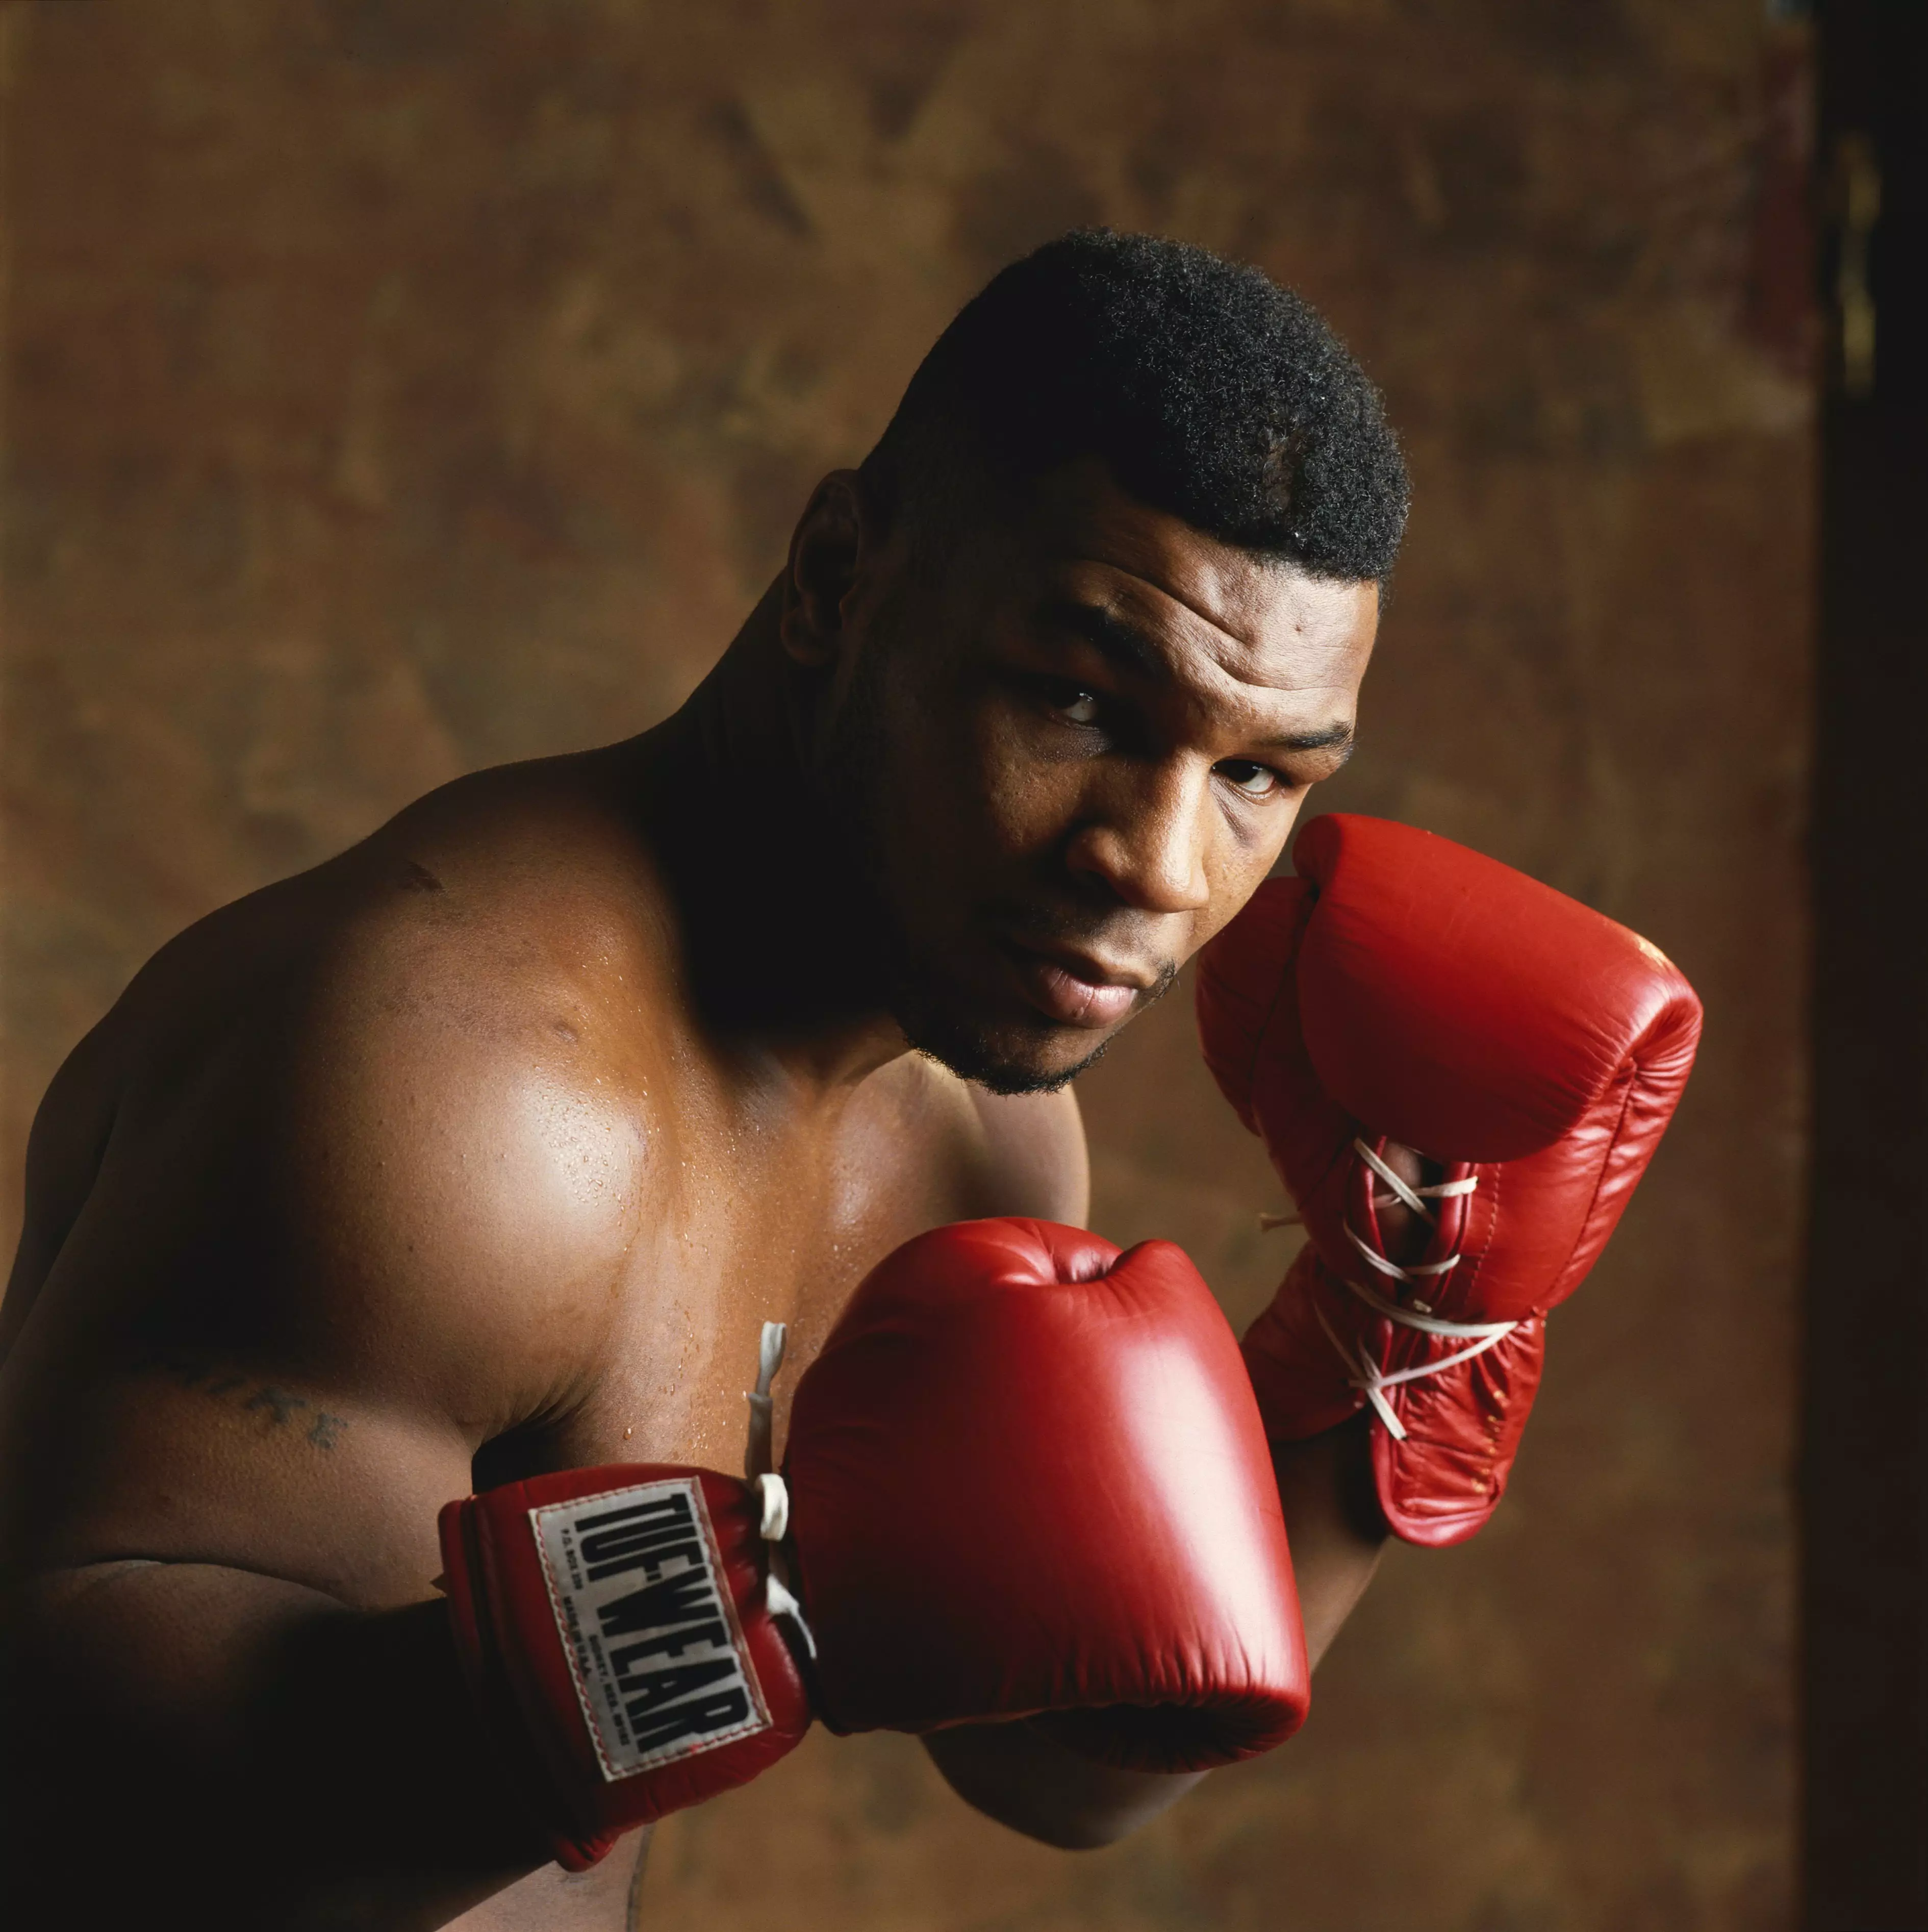 Tyson is one of the greatest boxers of all time. (Image